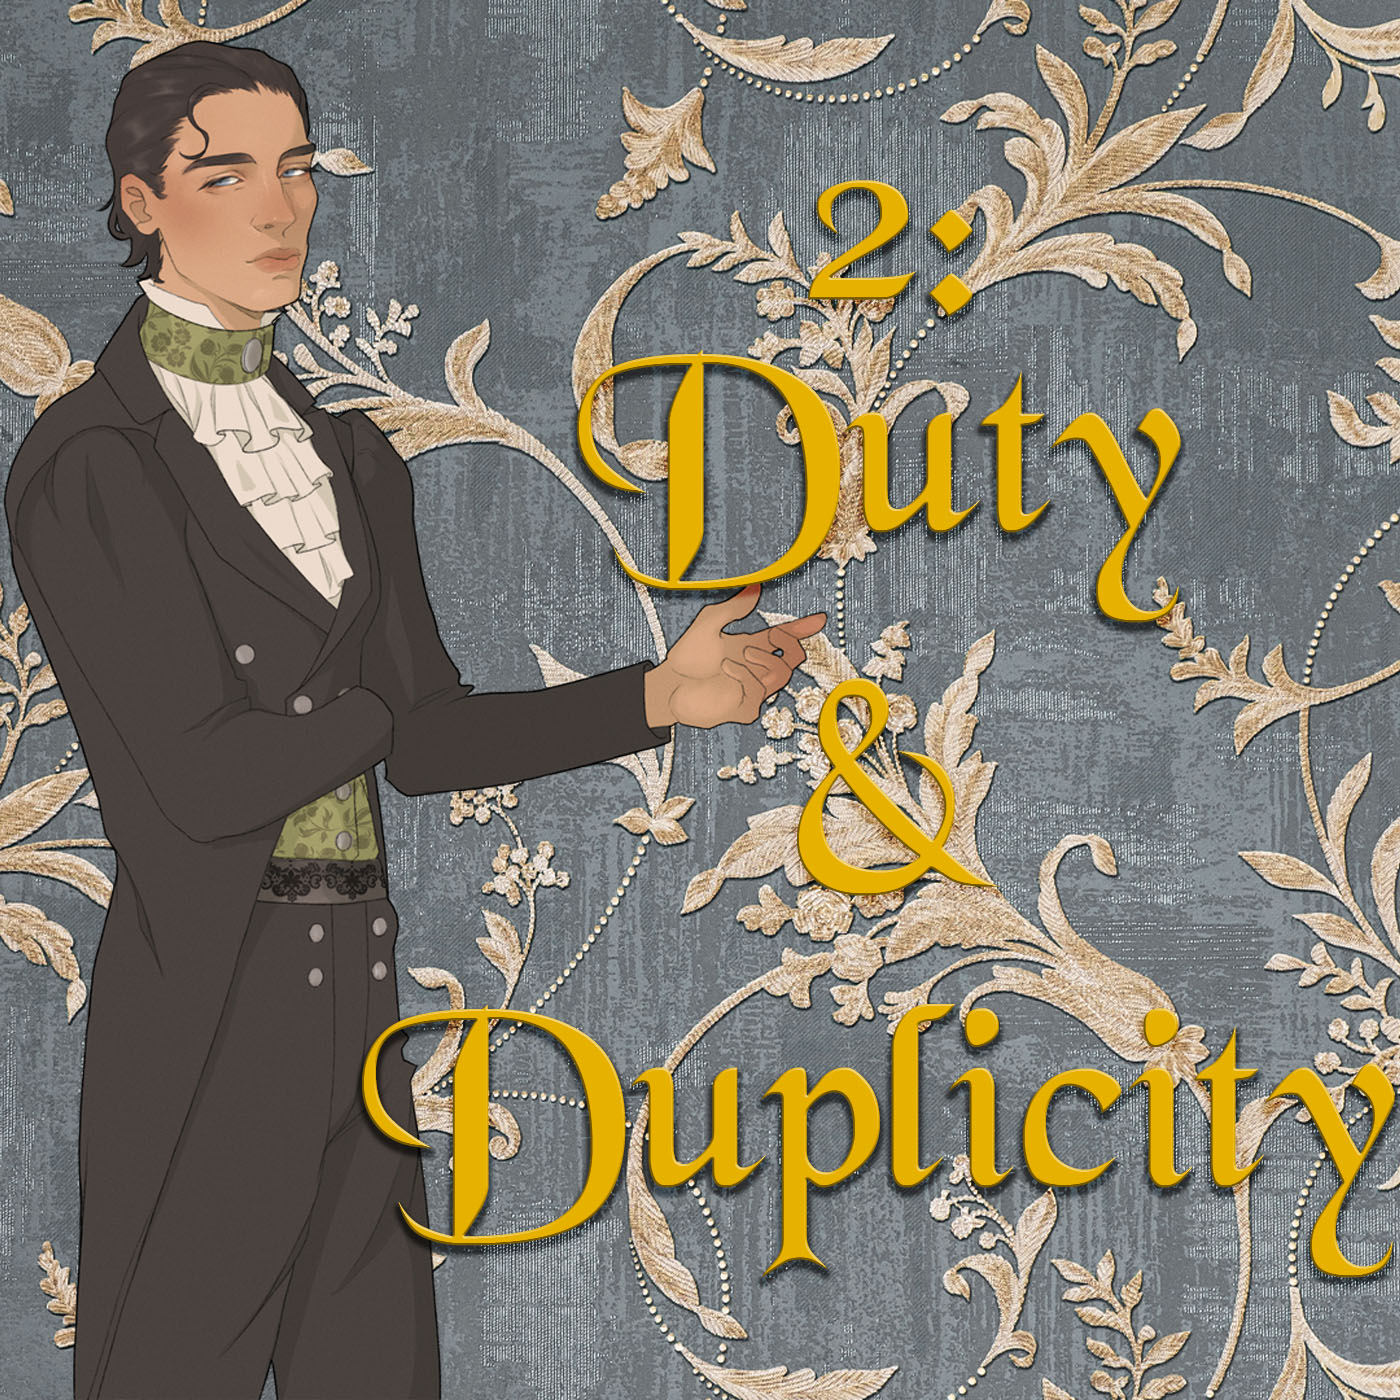 Ep 2: Of Duty and Duplicity